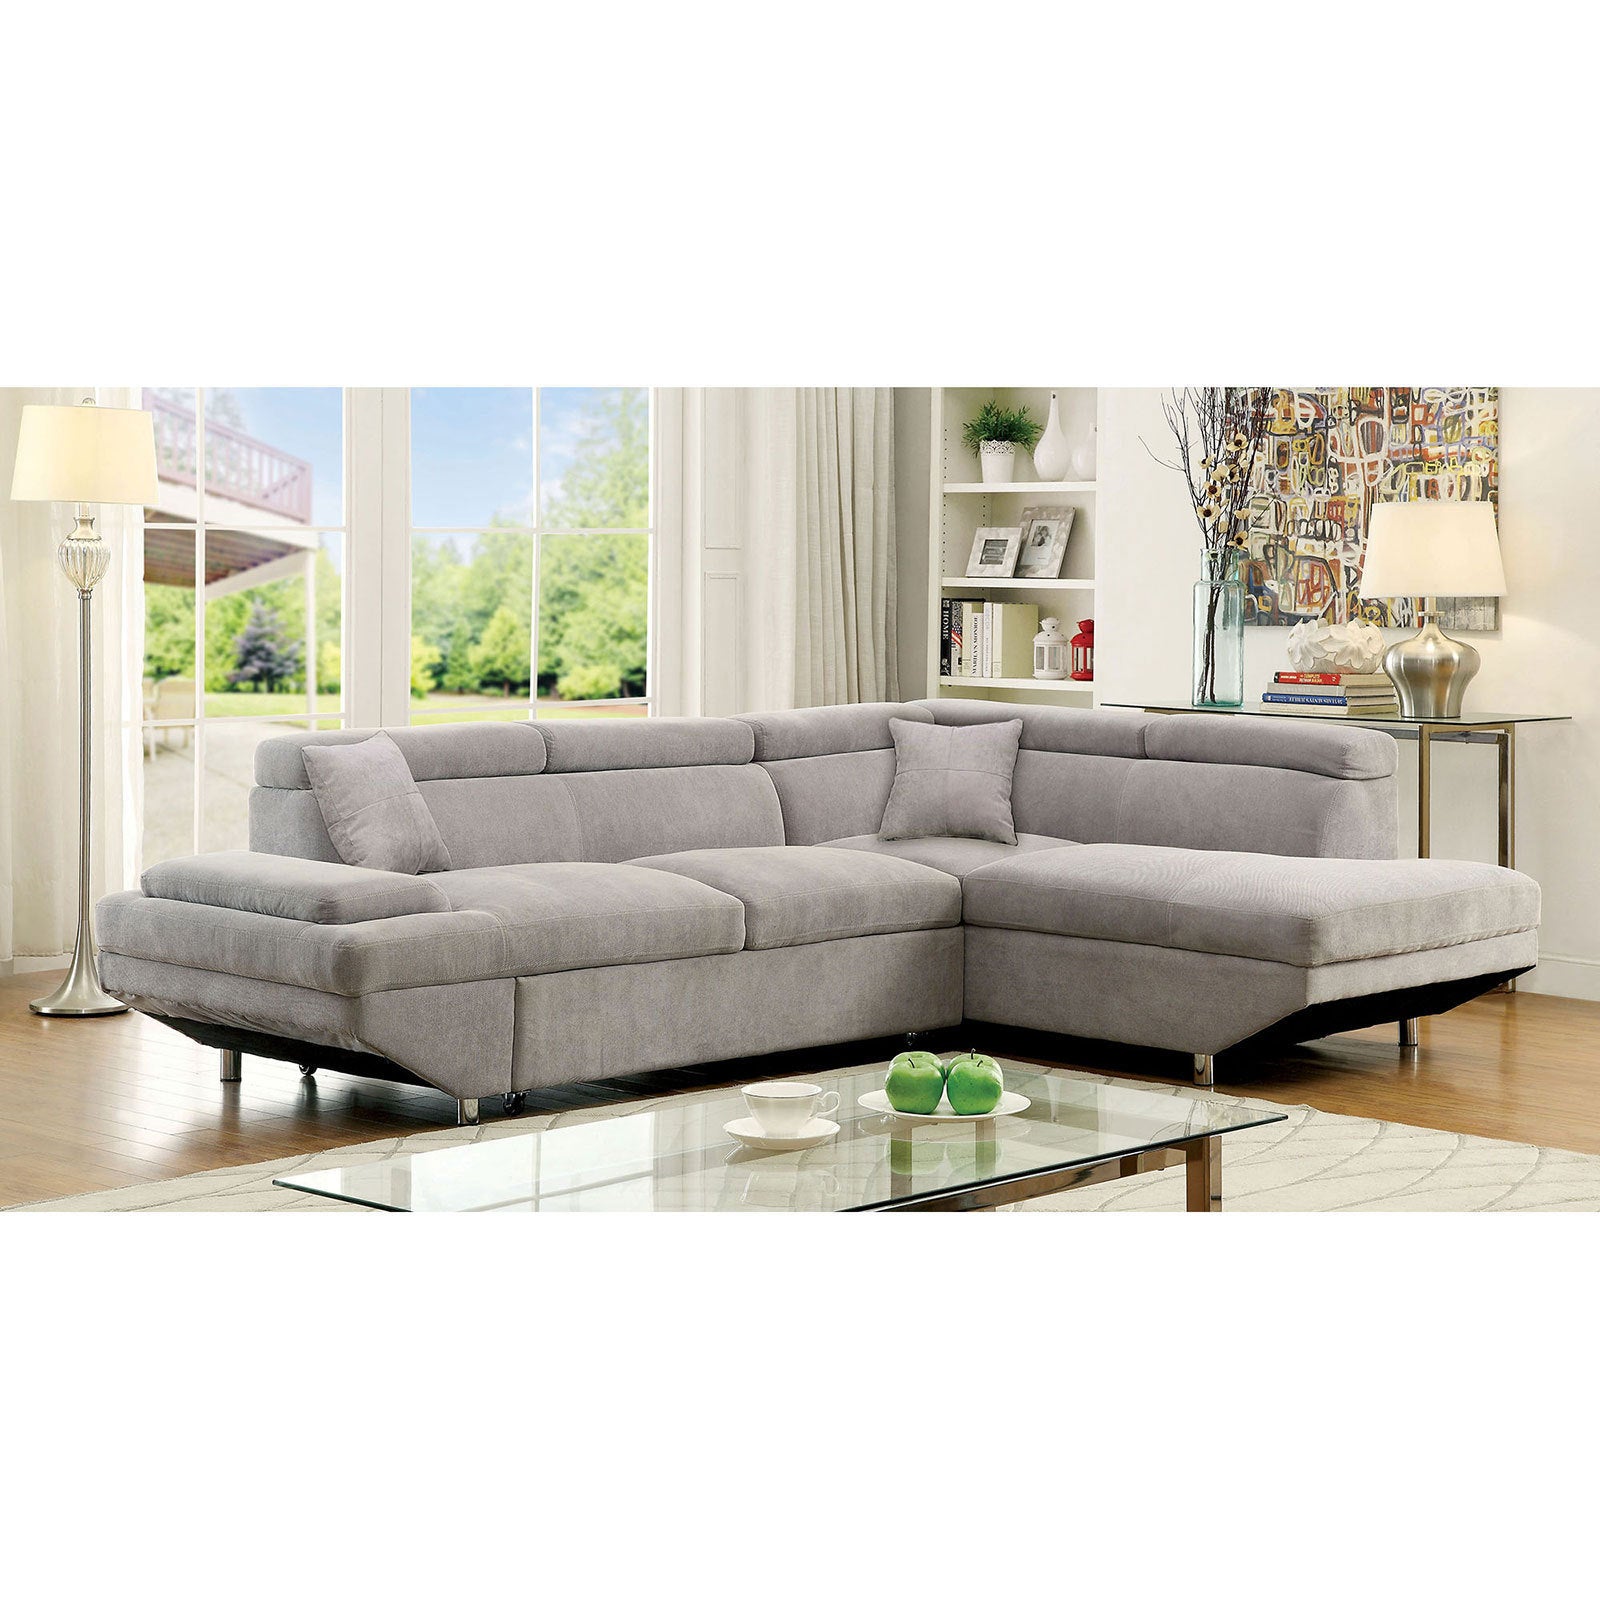 Sofa with Pull-Out Cushion (Gray)